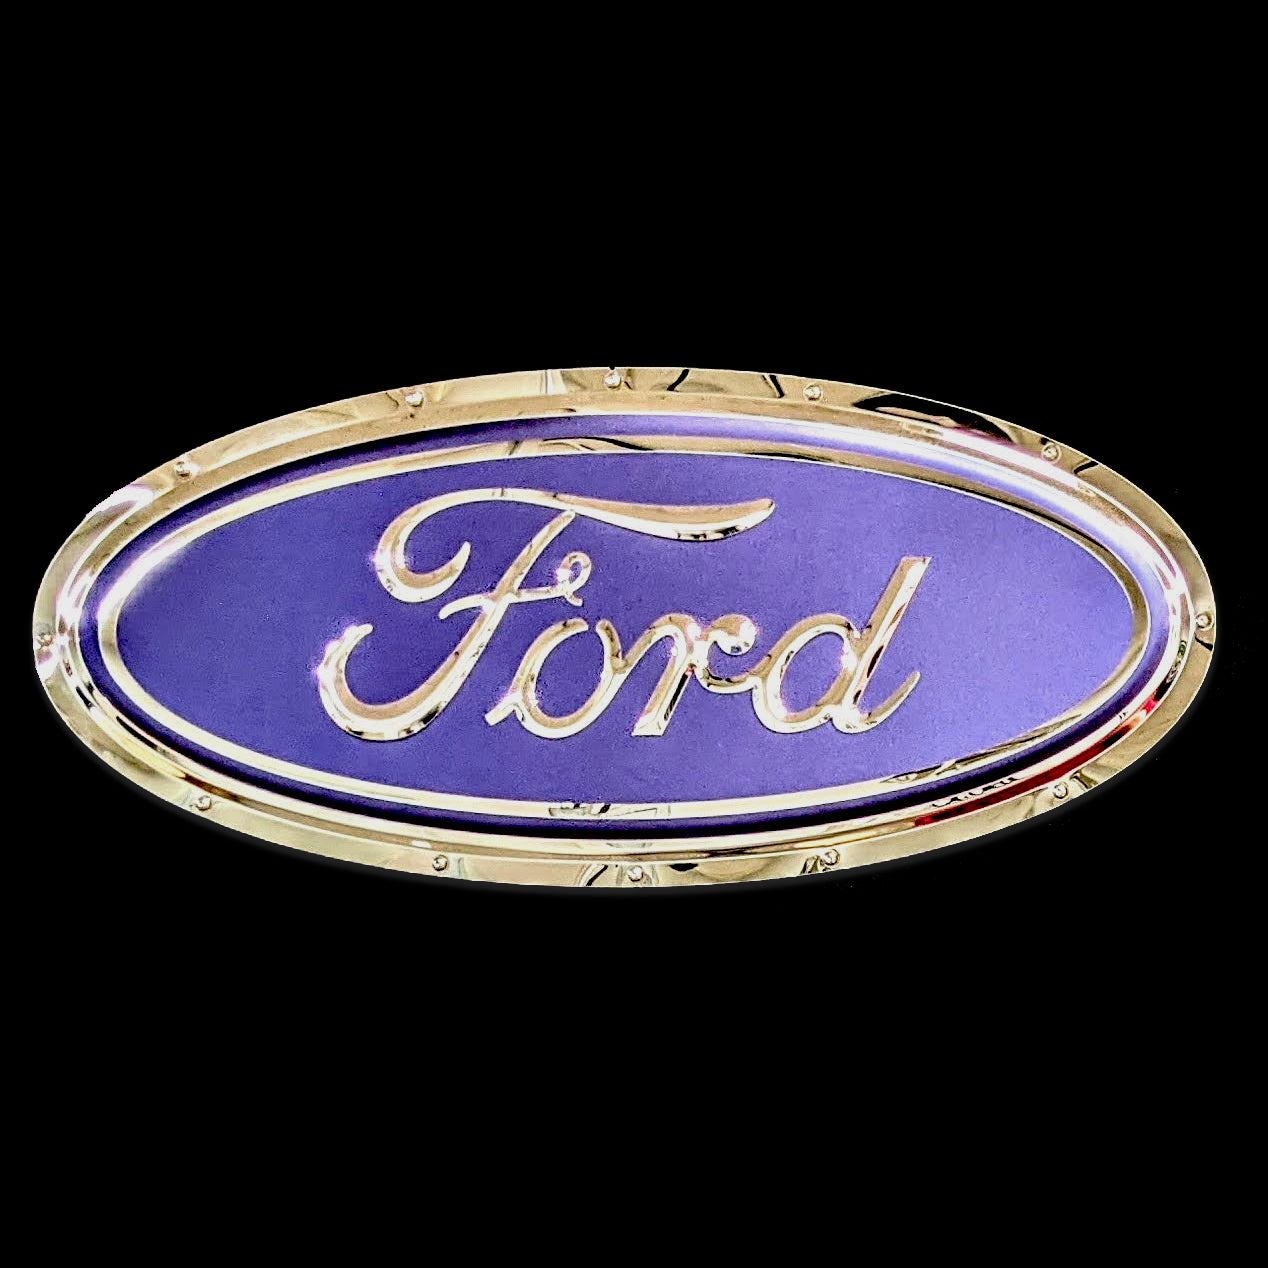 embossed mirror polished stainless steel sign décor ford blue oval